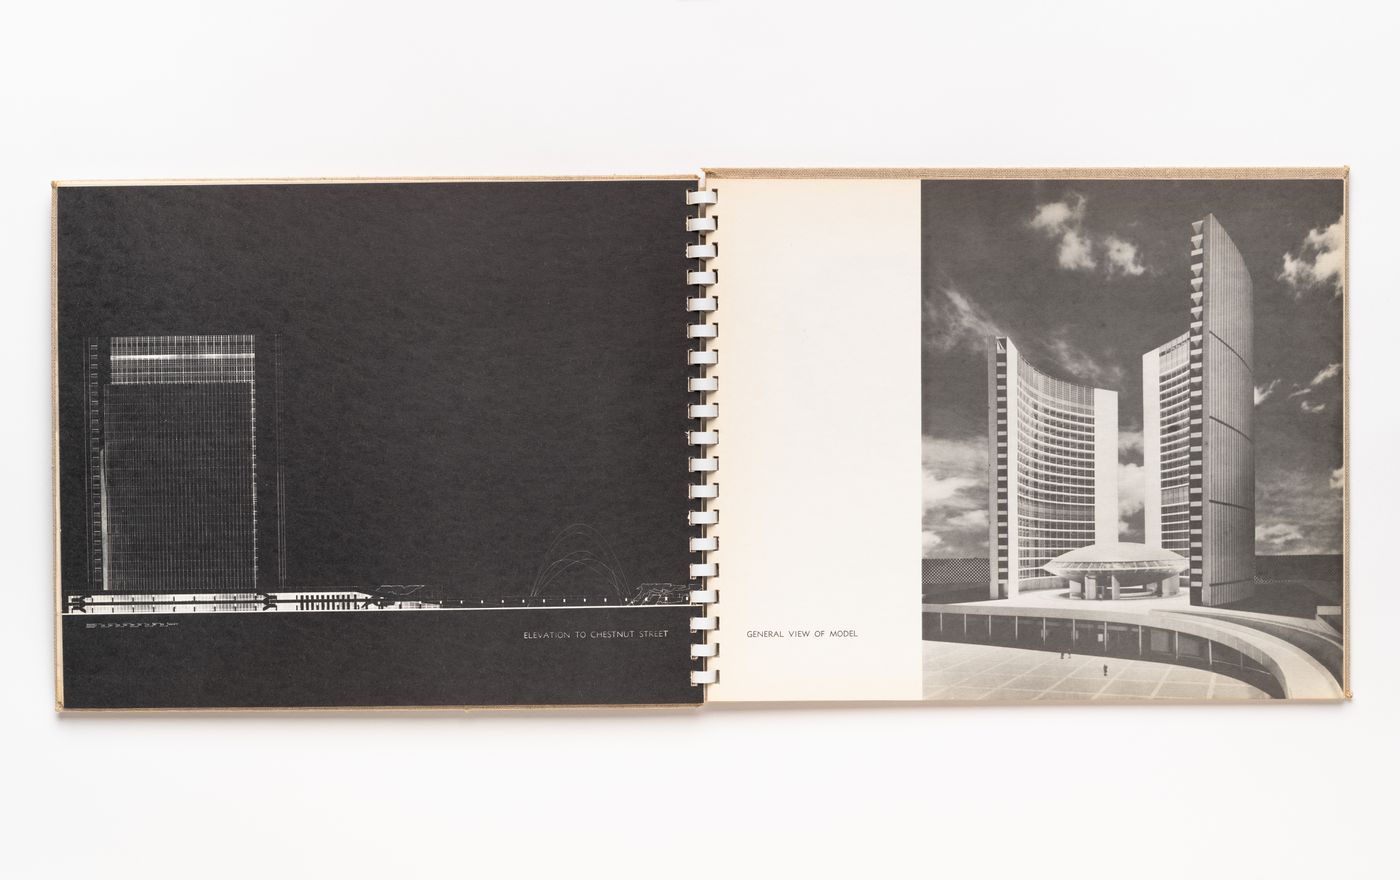 Presentation booklet of submission drawings for competition, Toronto City Hall and Civic Square, Toronto